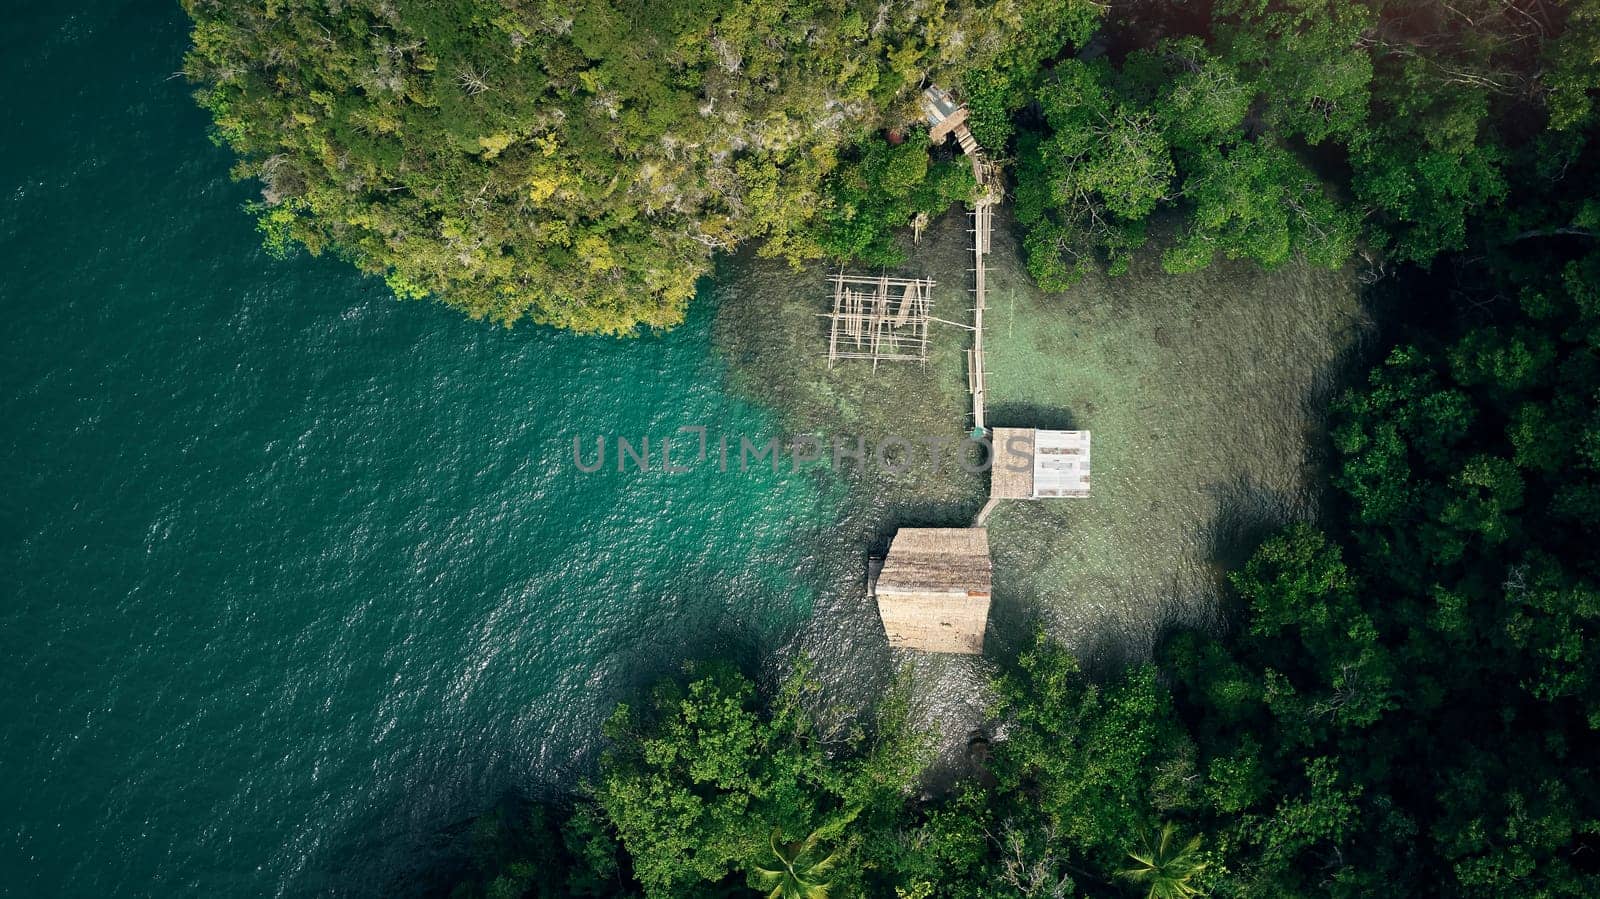 Drone, ocean and wood building in nature by beach, forest and woods with trees outdoor in Malaysia. Kelong, aerial view and house at sea for fishing, offshore or travel by water in summer environment.